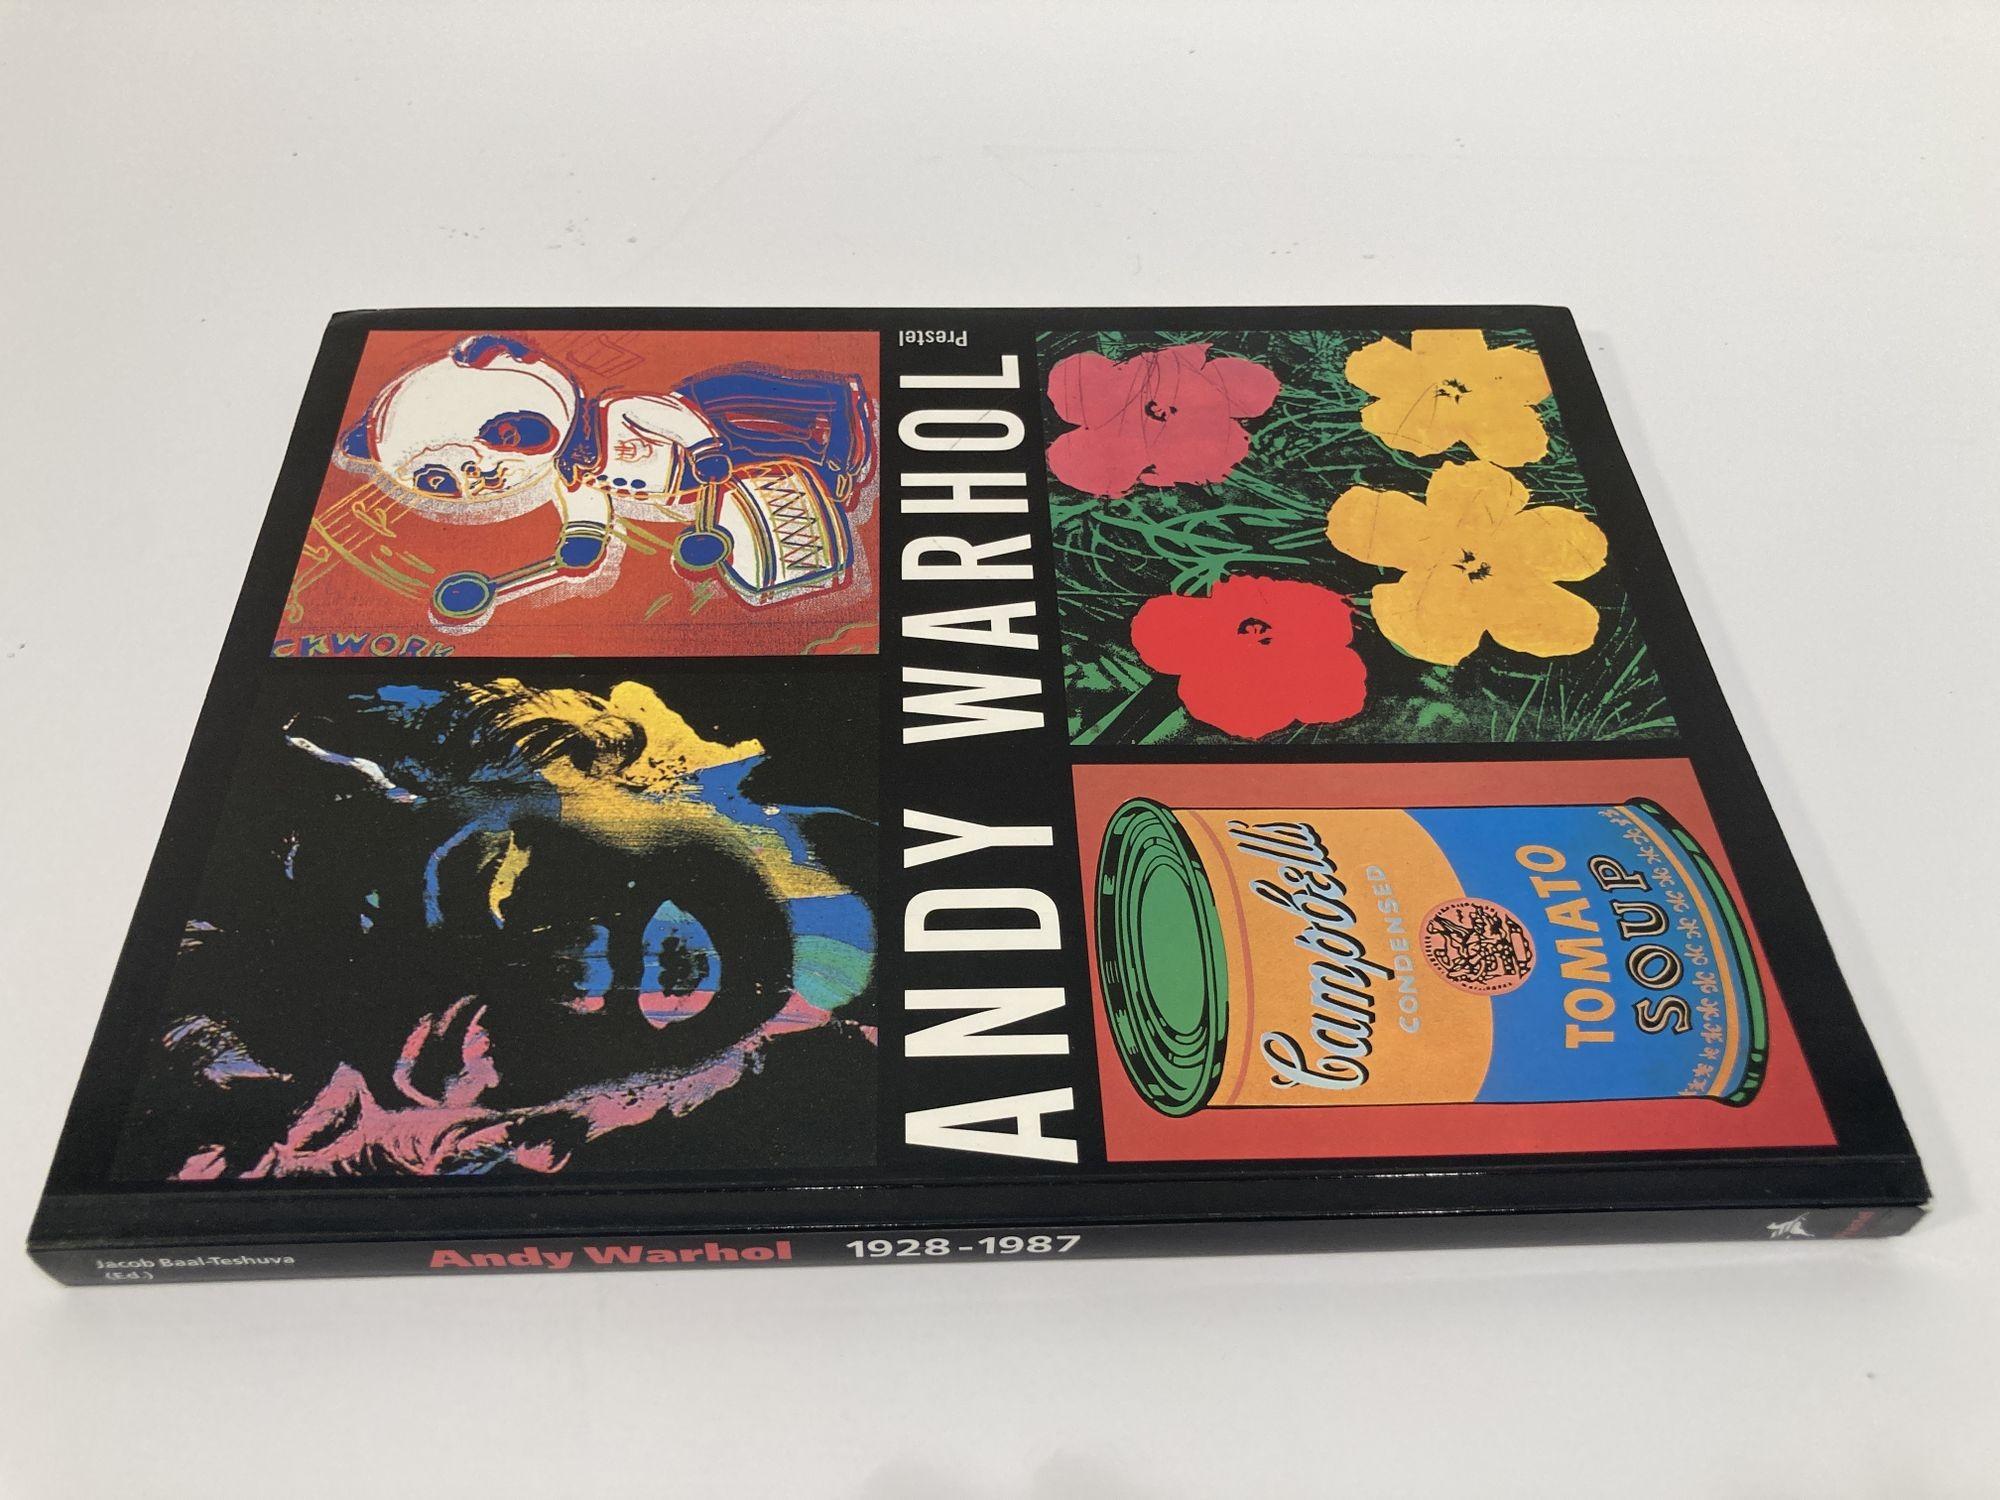 Andy Warhol, 1928-1987
Works from the collections of Jose´ Mugrabi and an Isle of Man company
Perfect Paperback –
January 1, 1993 by Jacob-Baal-Teshuva.





The art of Andy Warhol continues to hold surprises for even the seasoned Warhol